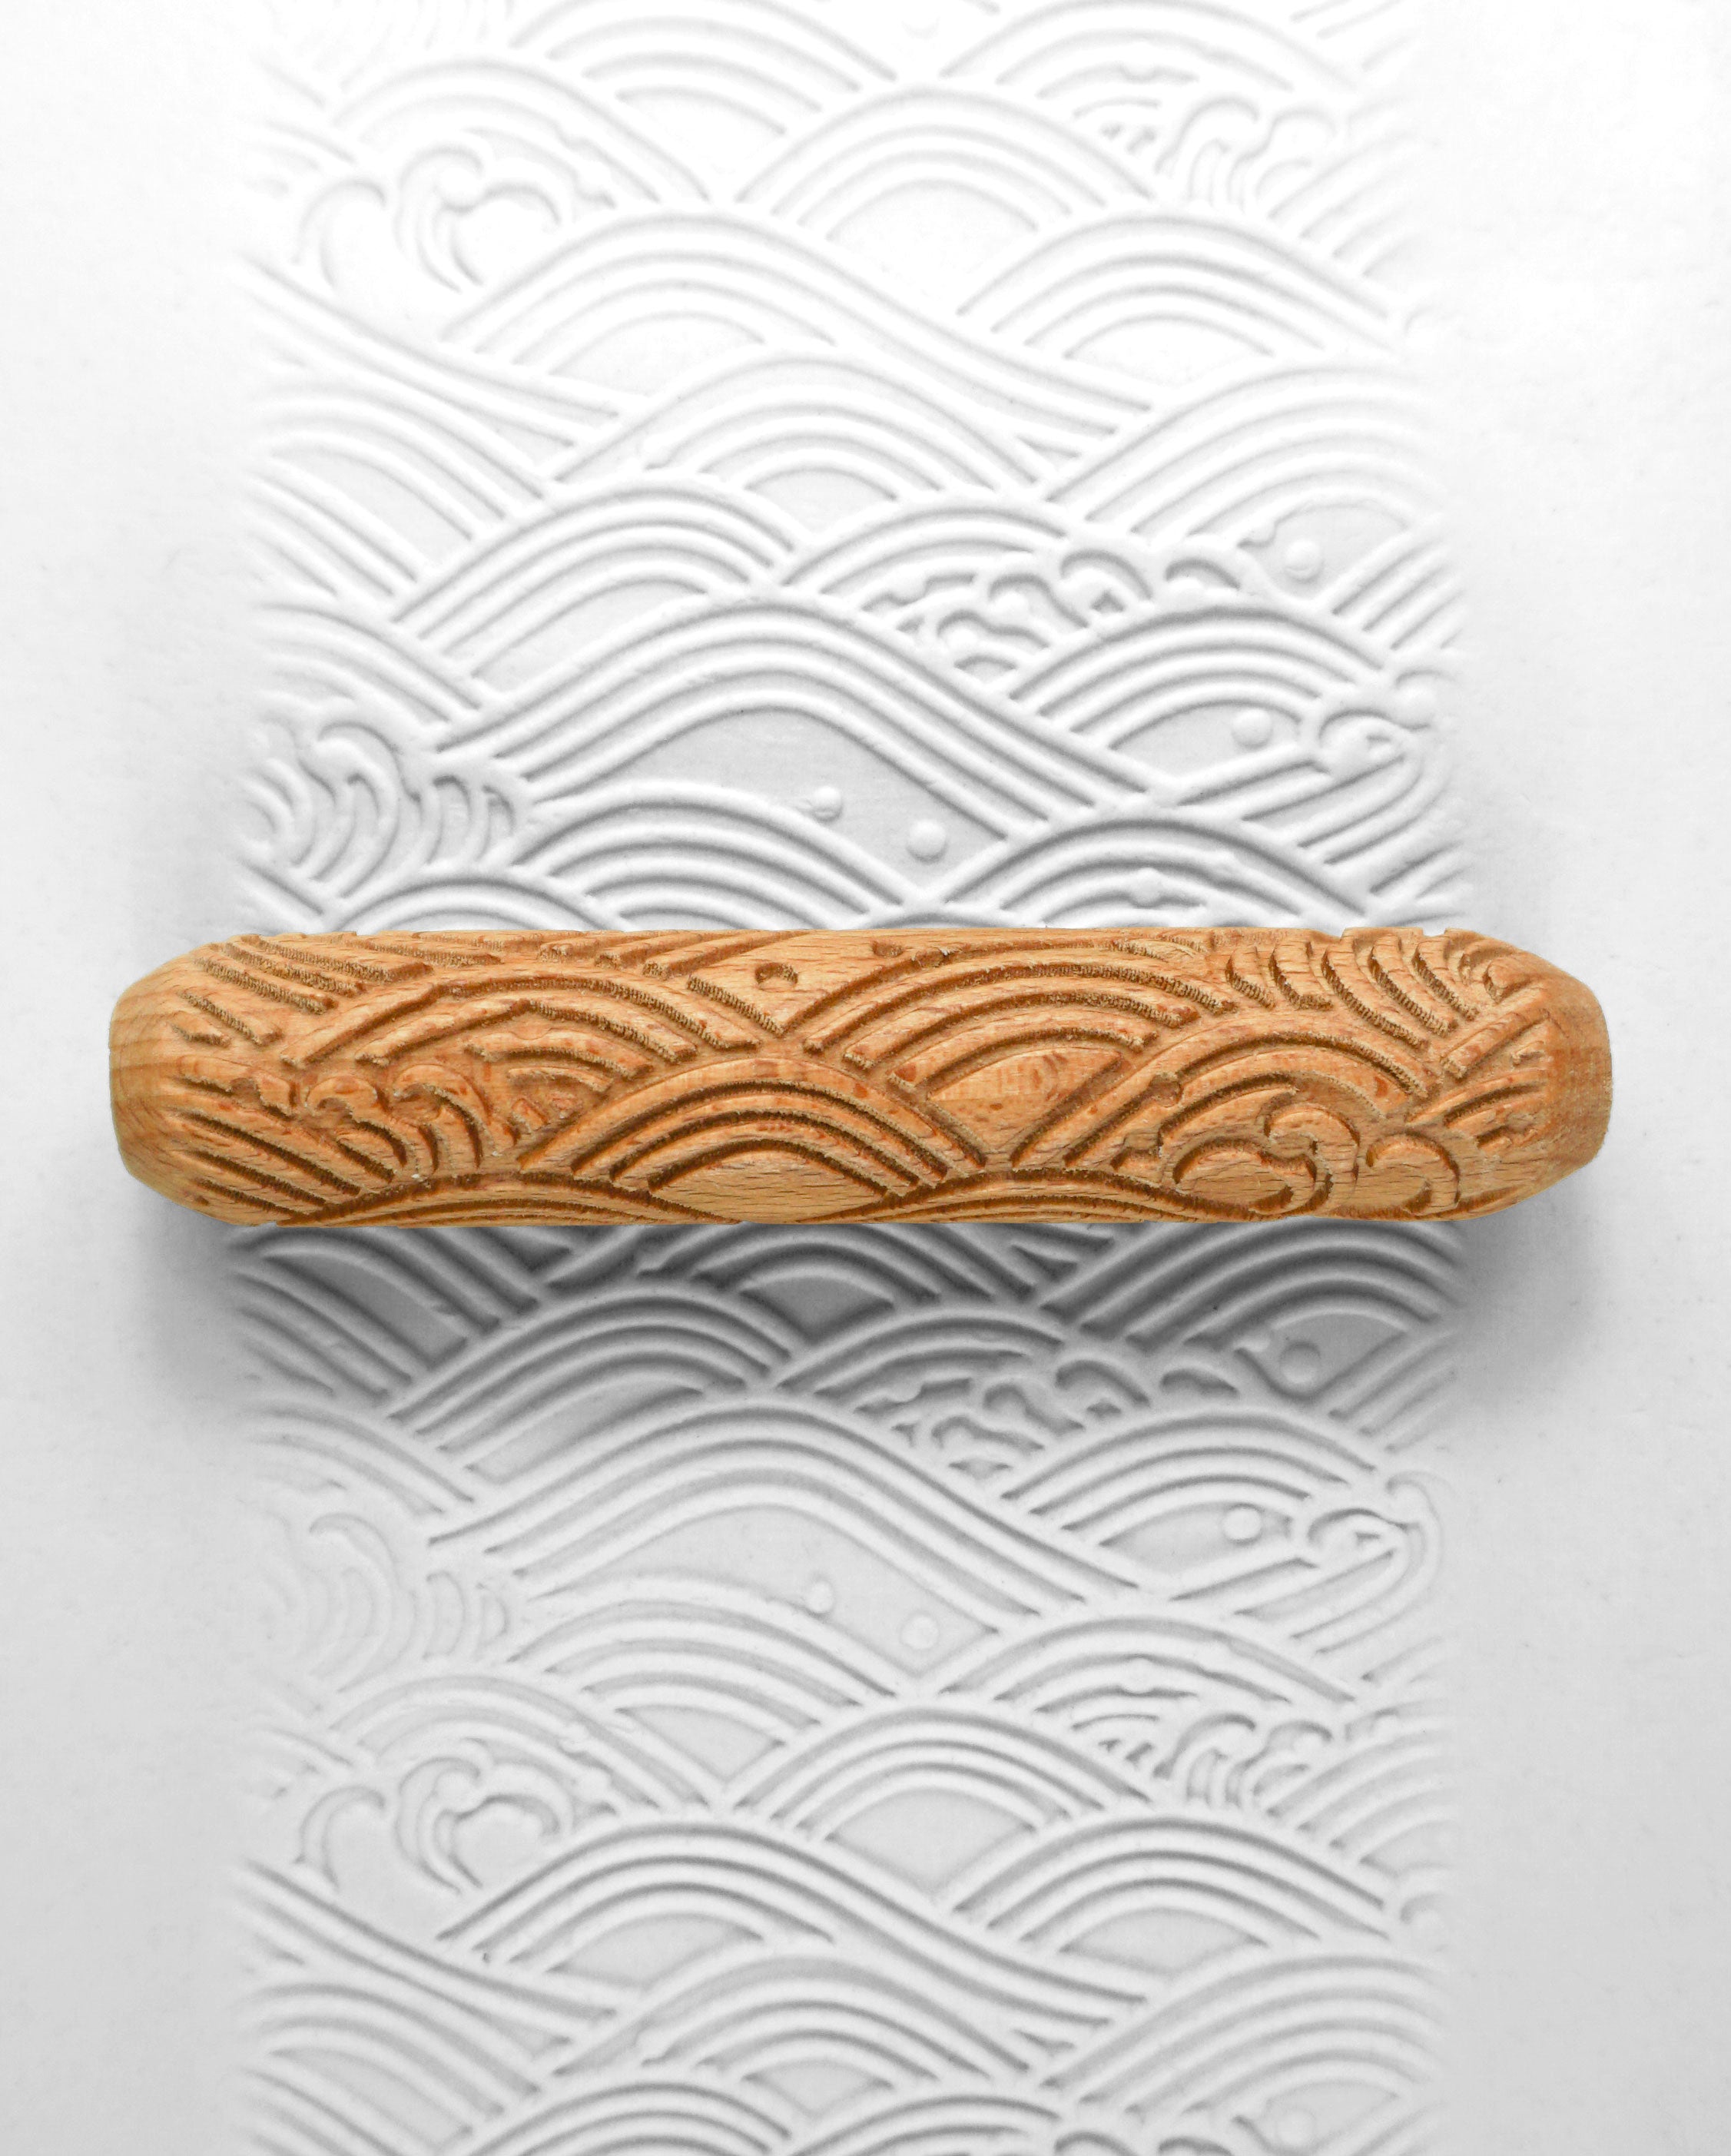 ZigZag Texture Roller, Clay Texture rolling pin, Clay pattern hand roller